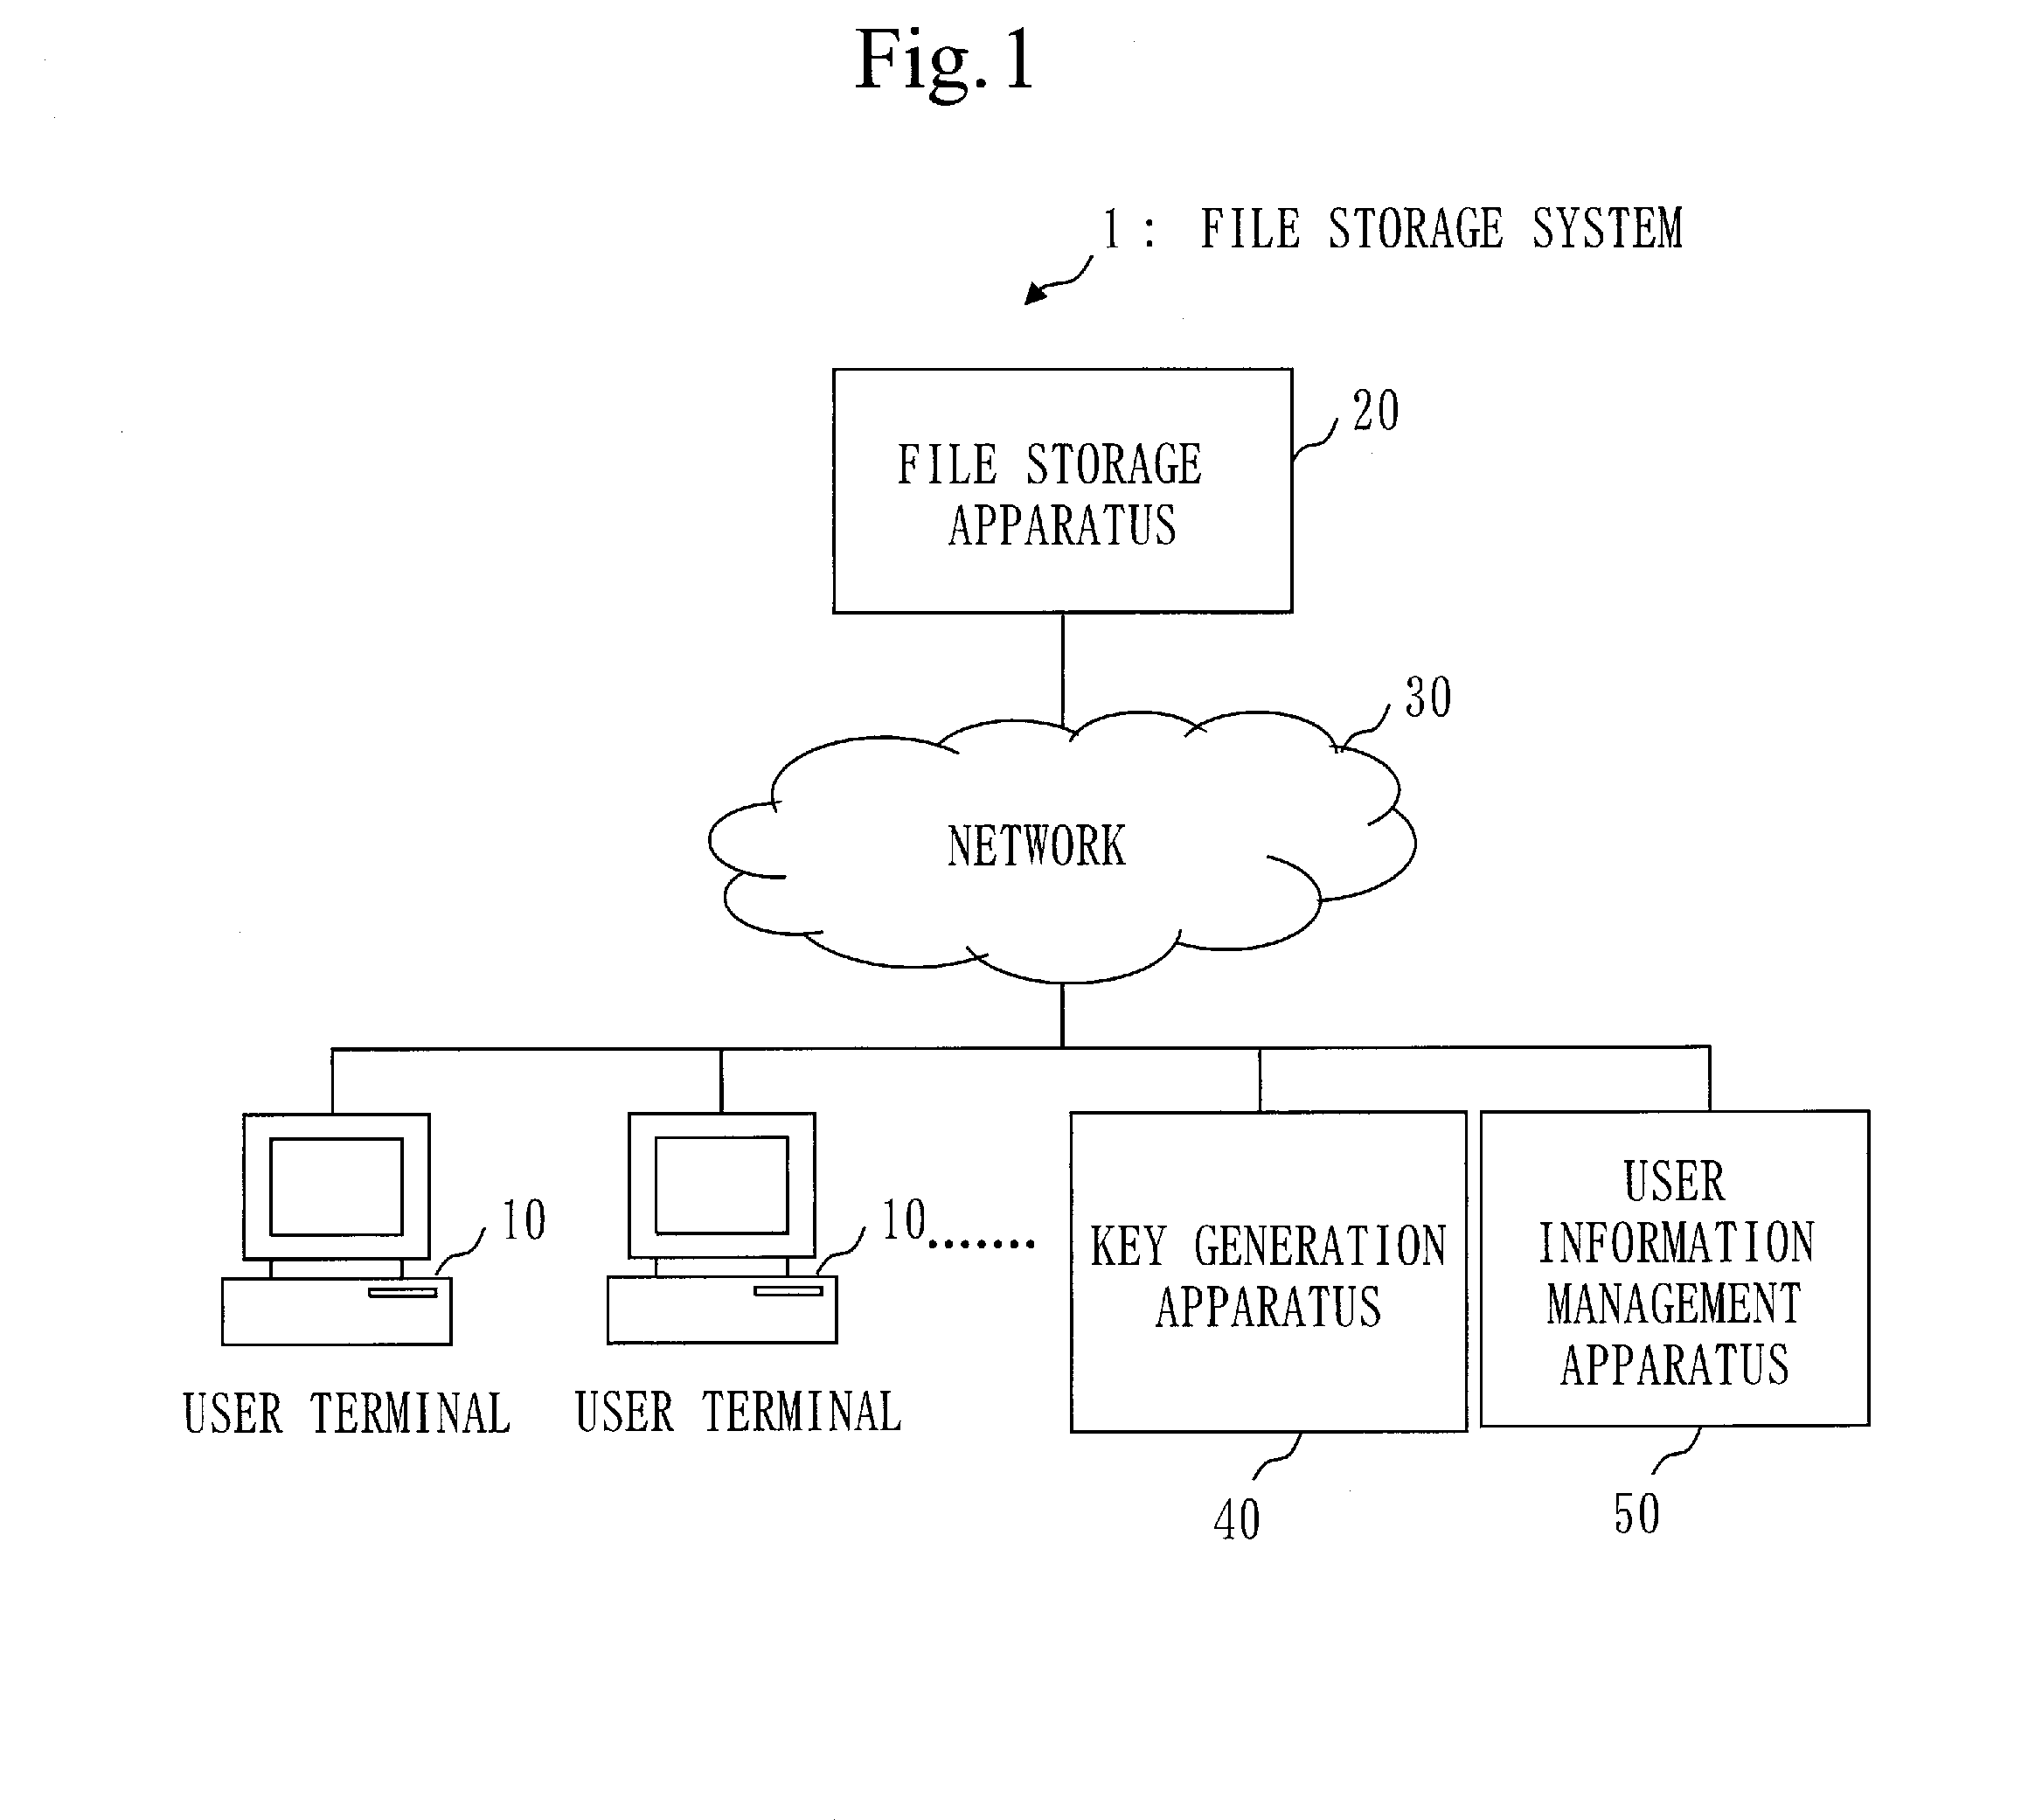 File storage system and user terminal